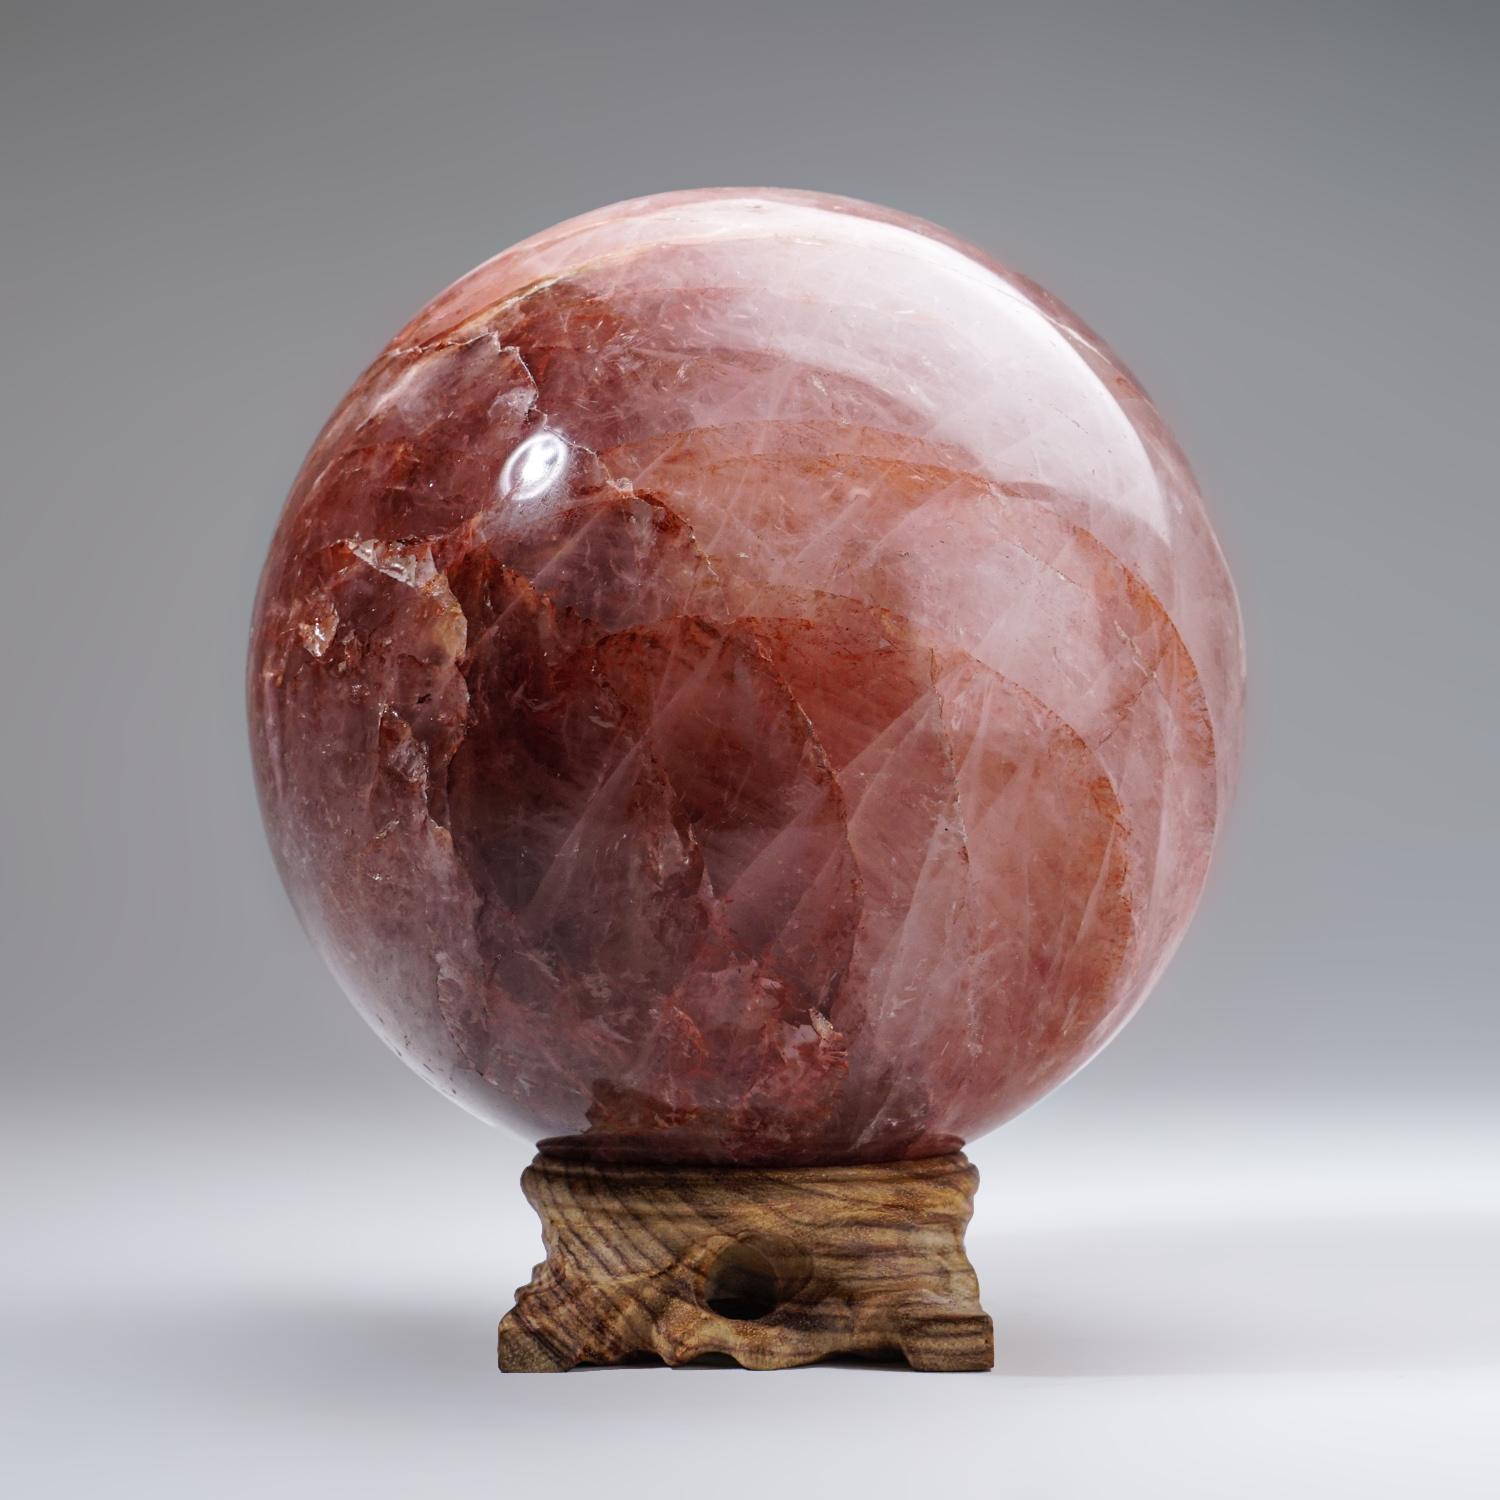 Top AAA quality polished Strawberry Quartz sphere from Madagascar. It has color ranges from light pink, strawberry pink, to raspberry pink.

Strawberry Quartz carries all the energies of a Clear Quartz, with the additional vibrations of universal